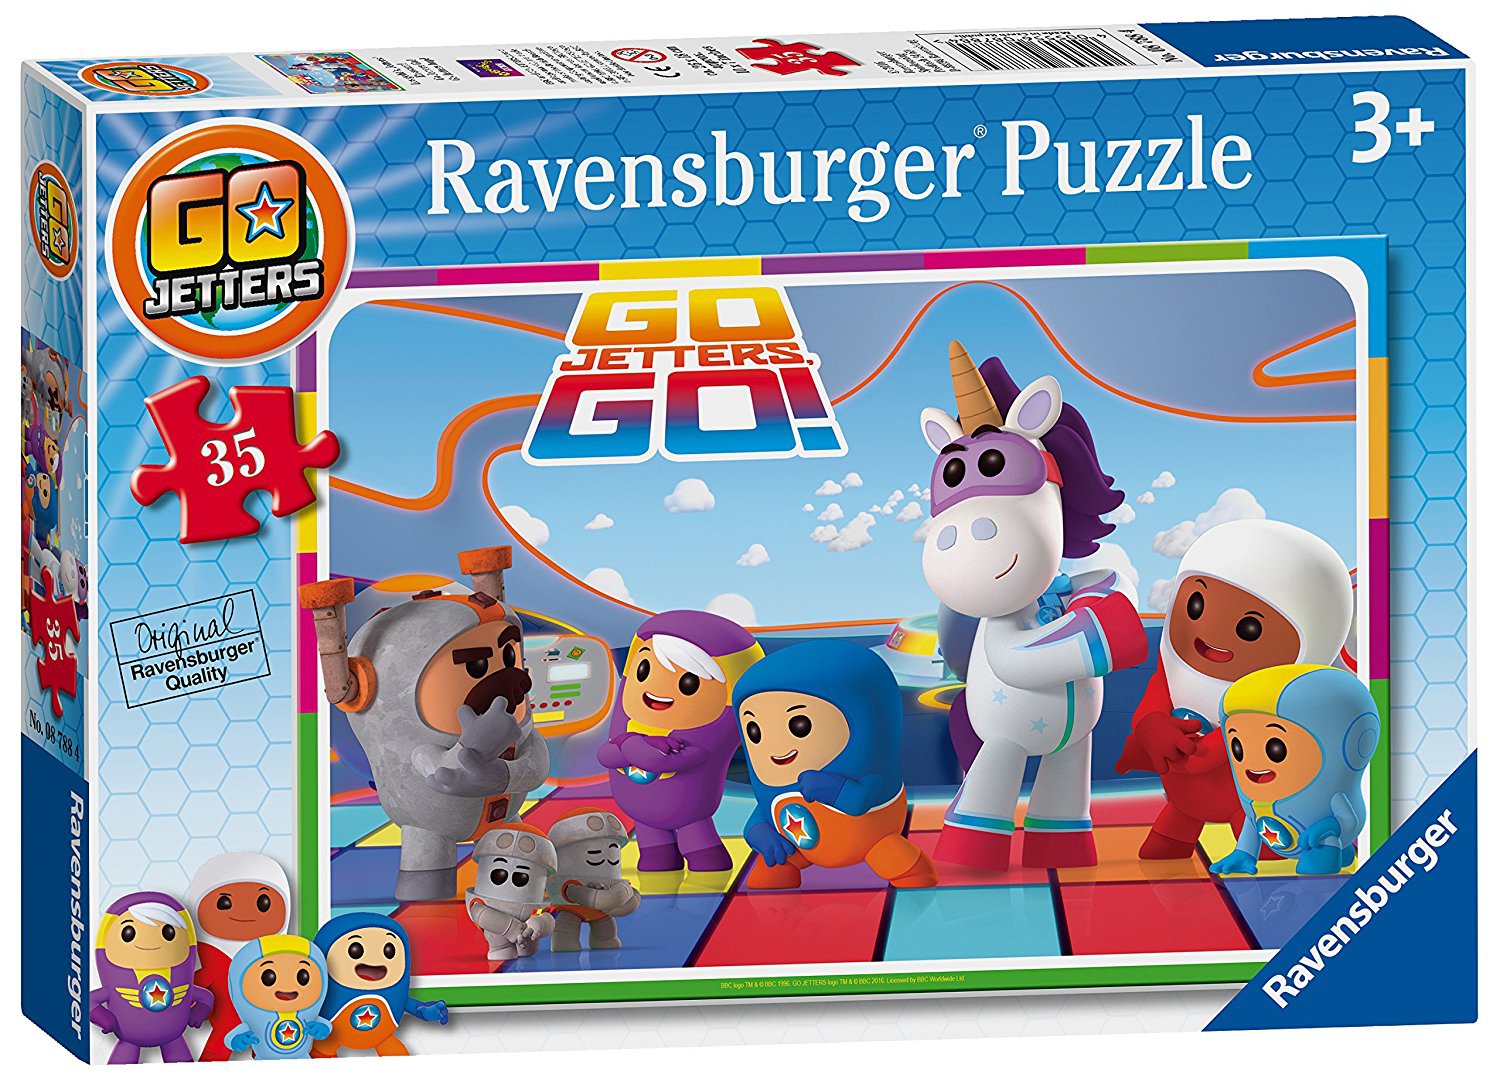 Go Jetters 35 Piece Jigsaw Puzzle Game